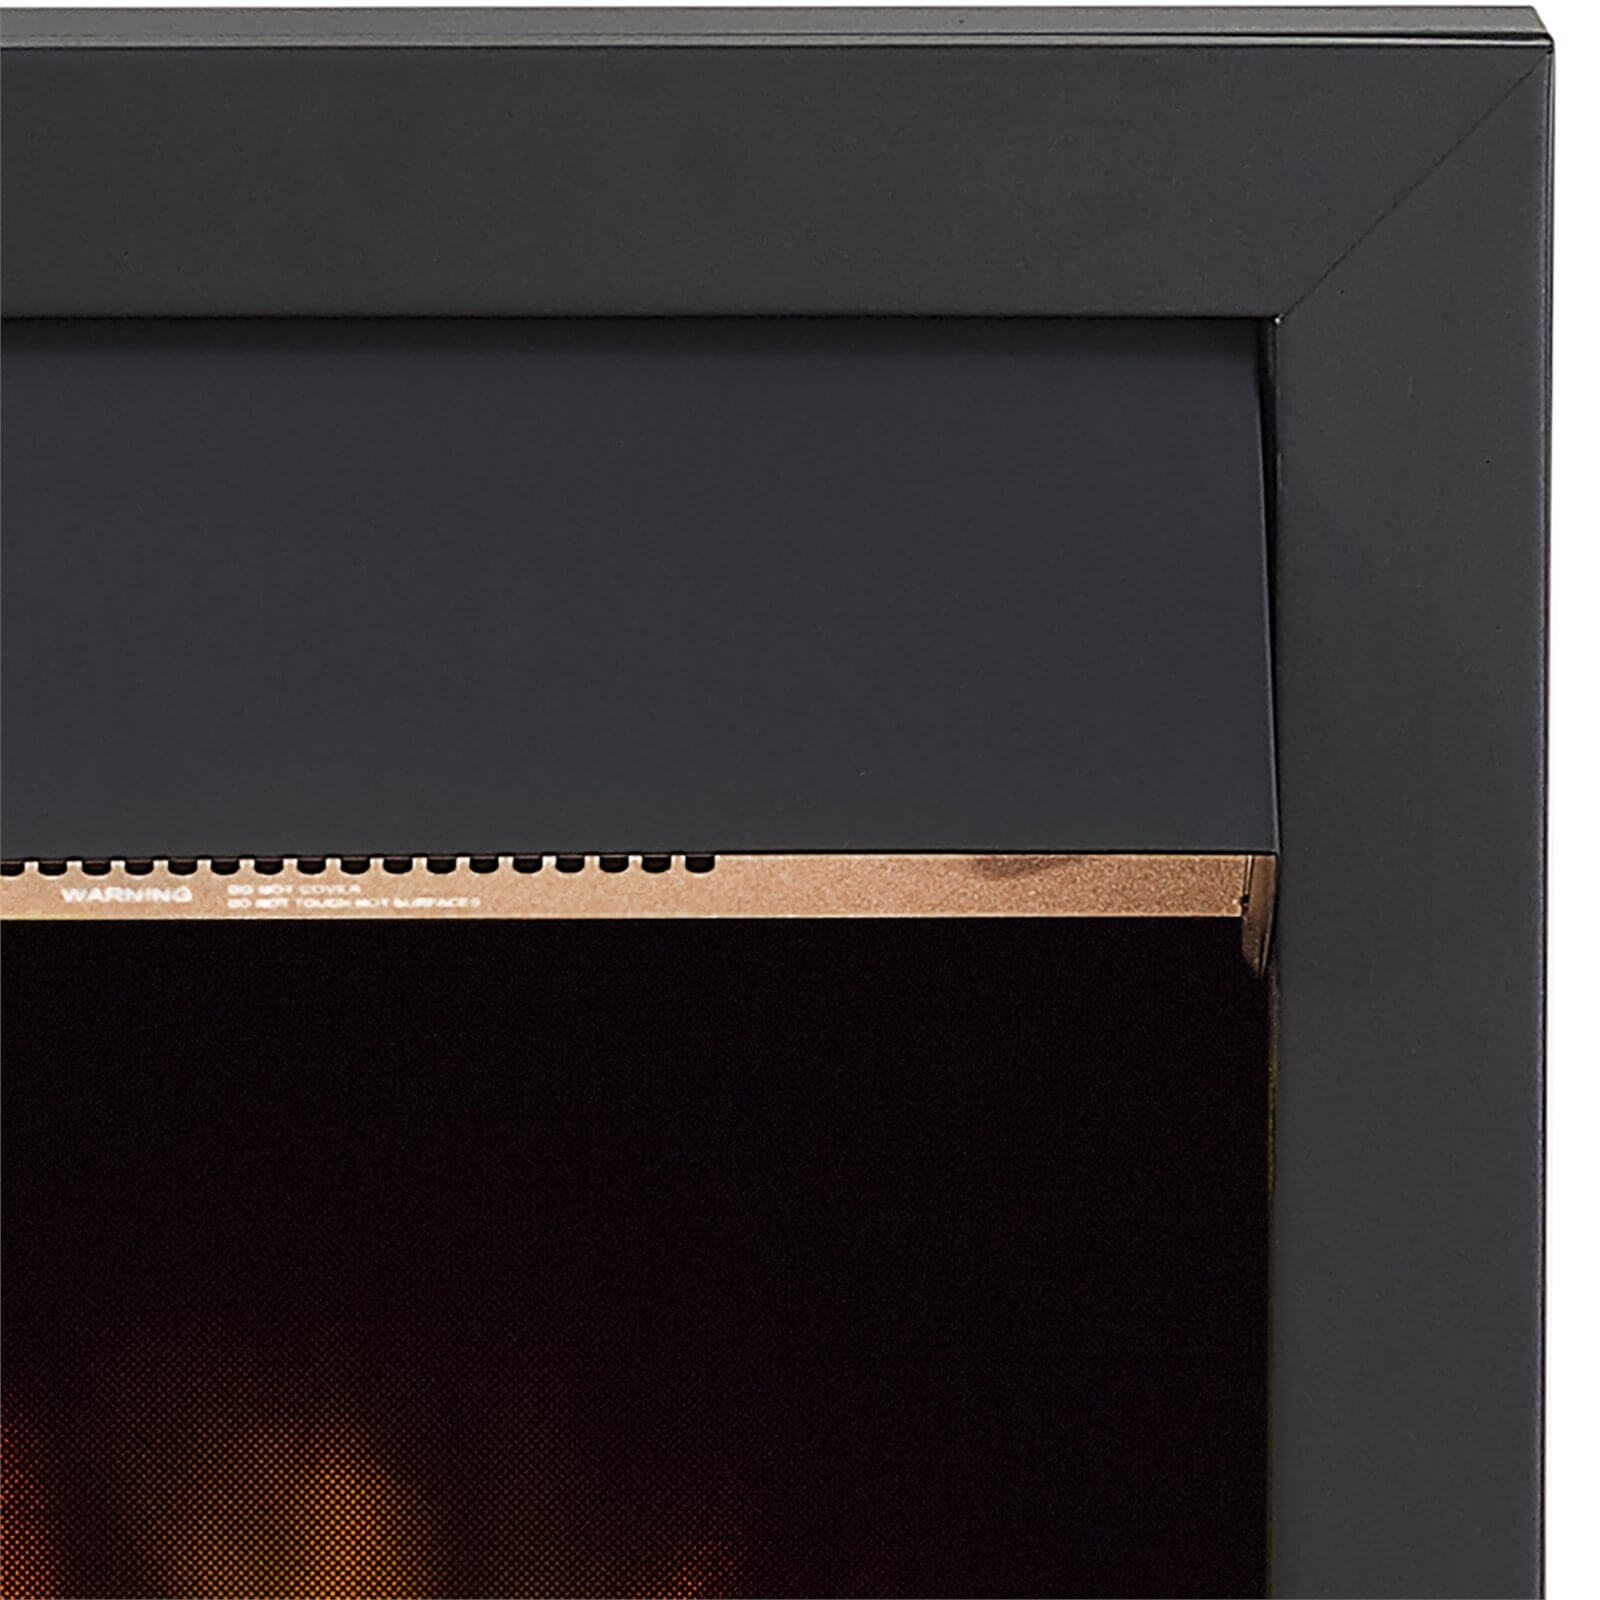 Adam Colorado Electric Fire with Inset Fitting - Black